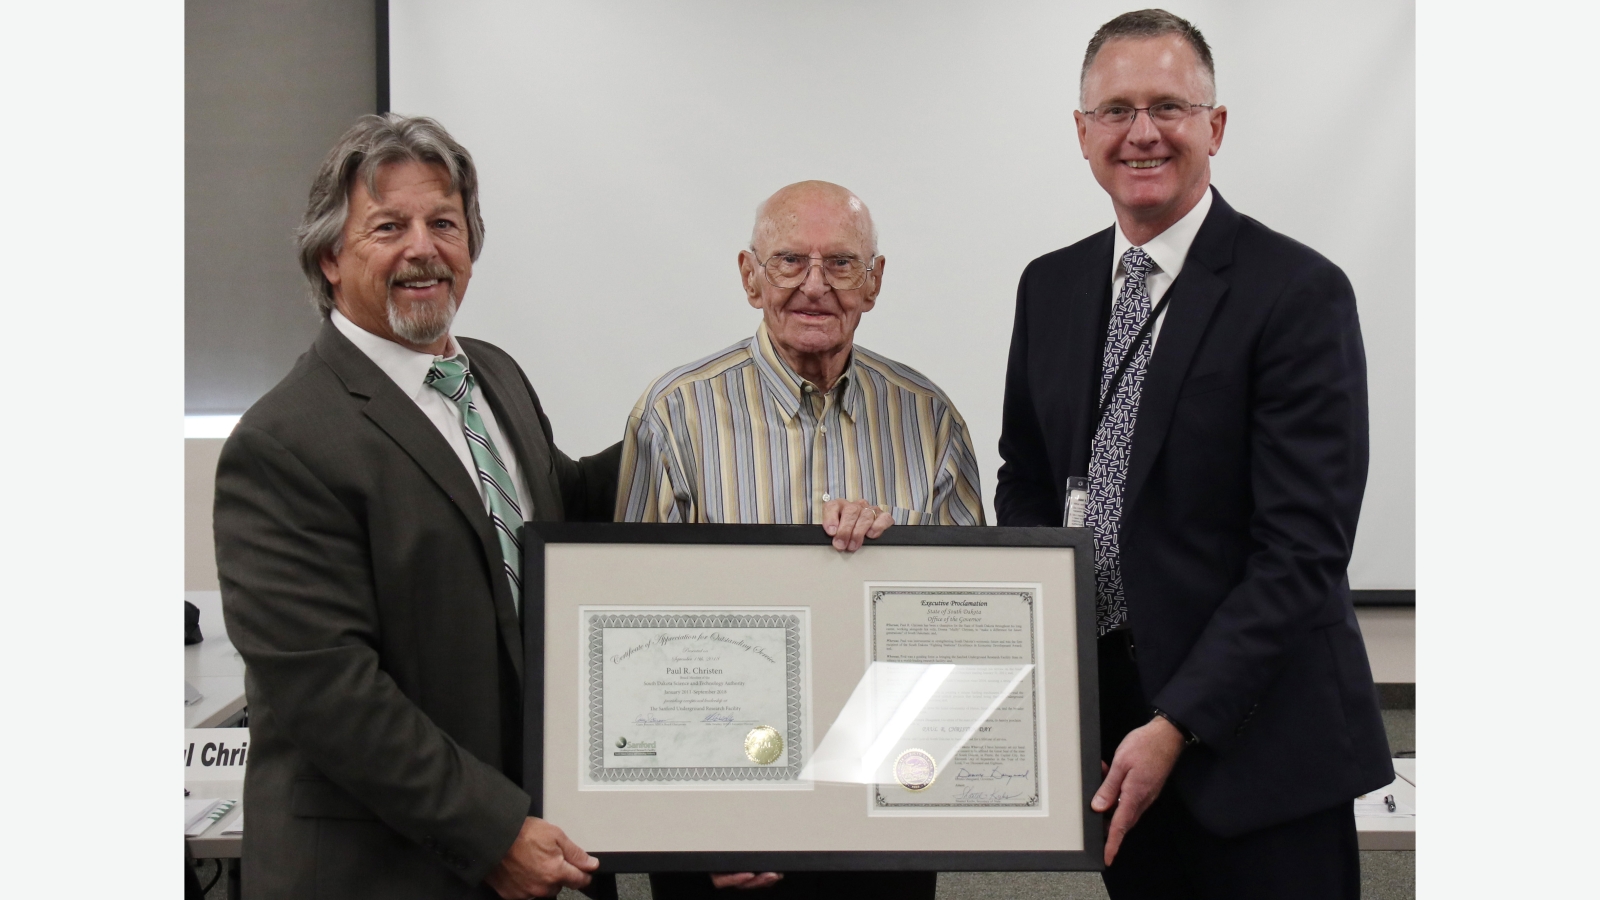 Casey Peterson, chair of the SDSTA, and Mike Headley, executive director of the SDSTA, present Paul Christen, resigning board member with a certificate of service and a proclamation from the Governor’s office declaring September 18, 2018 “Paul R. Christen Day” during the regular quarterly Board meeting.